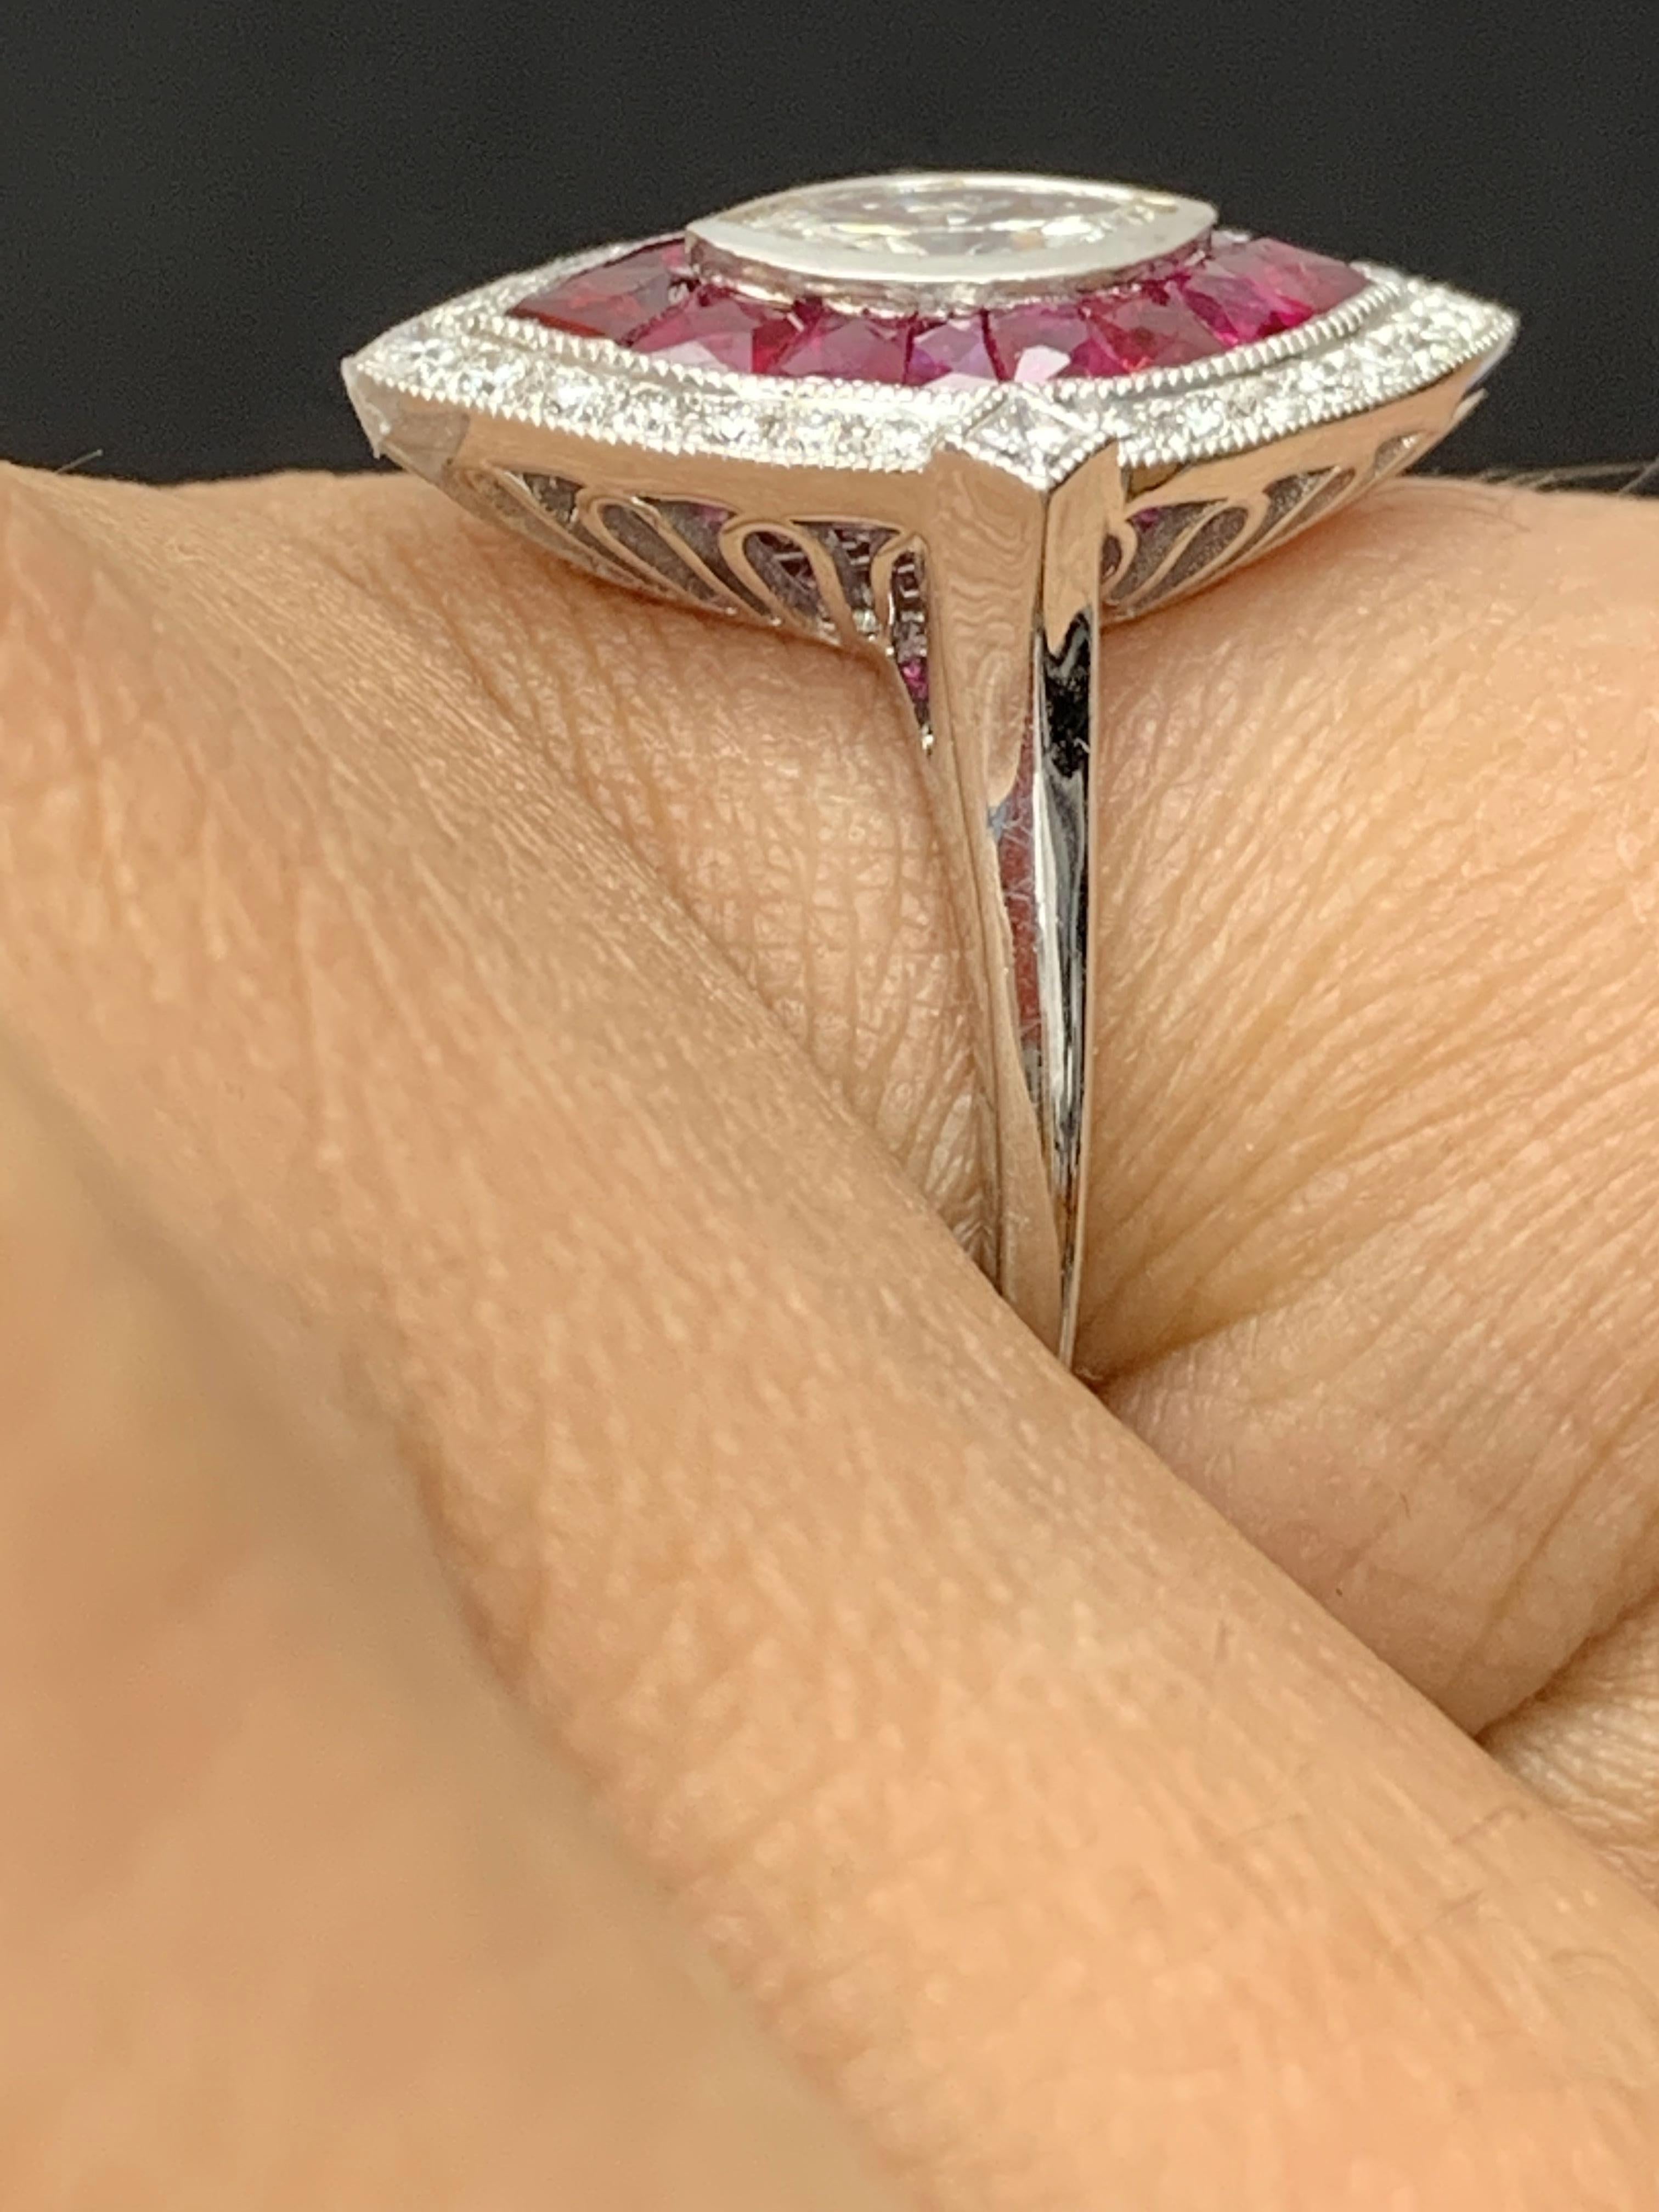 0.41 Carats Marquise Cut Diamond and Ruby Cocktail Ring in 14K White Gold For Sale 1